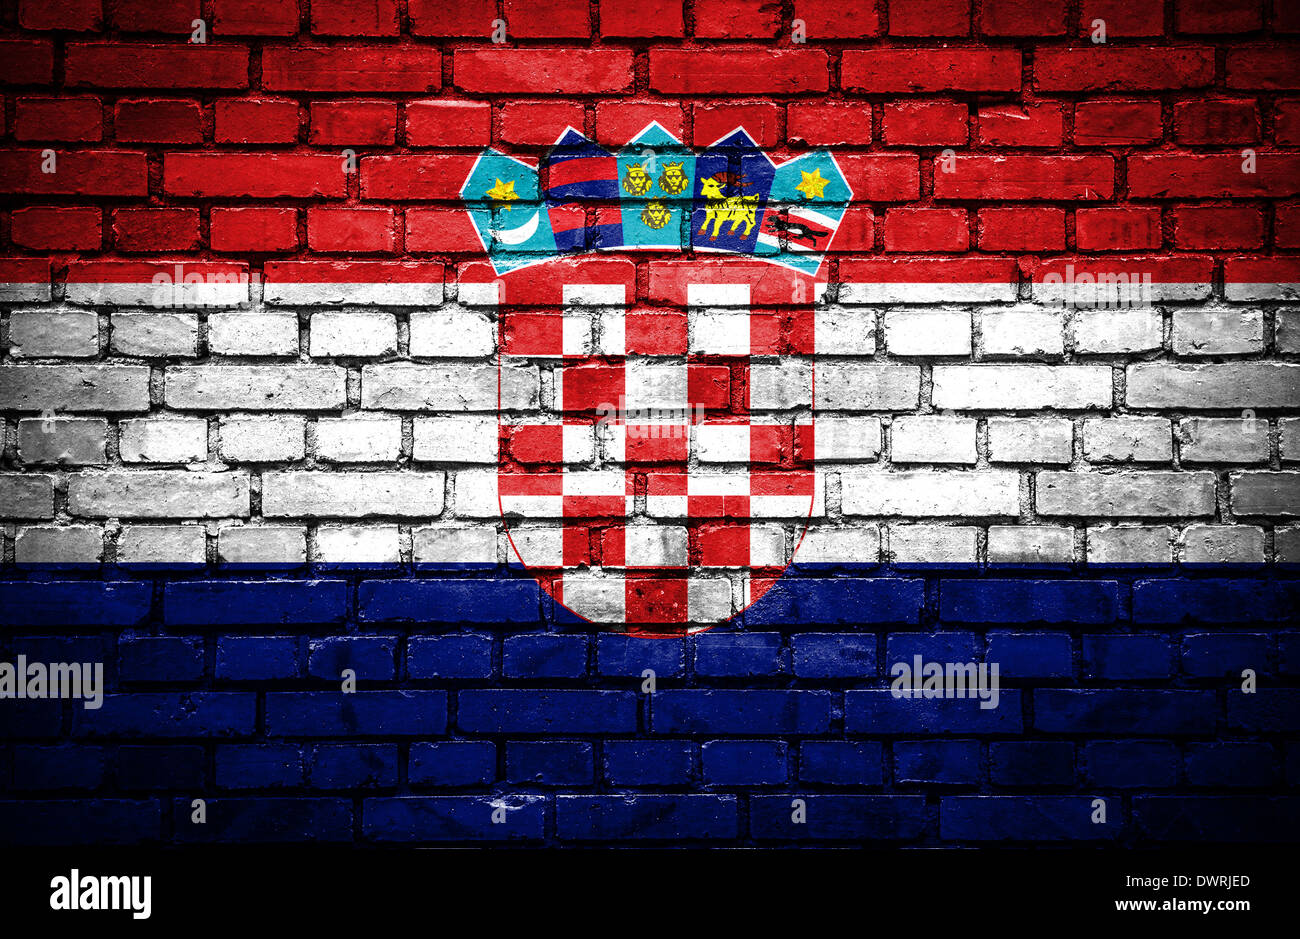 Brick wall with painted flag of Croatia Stock Photo